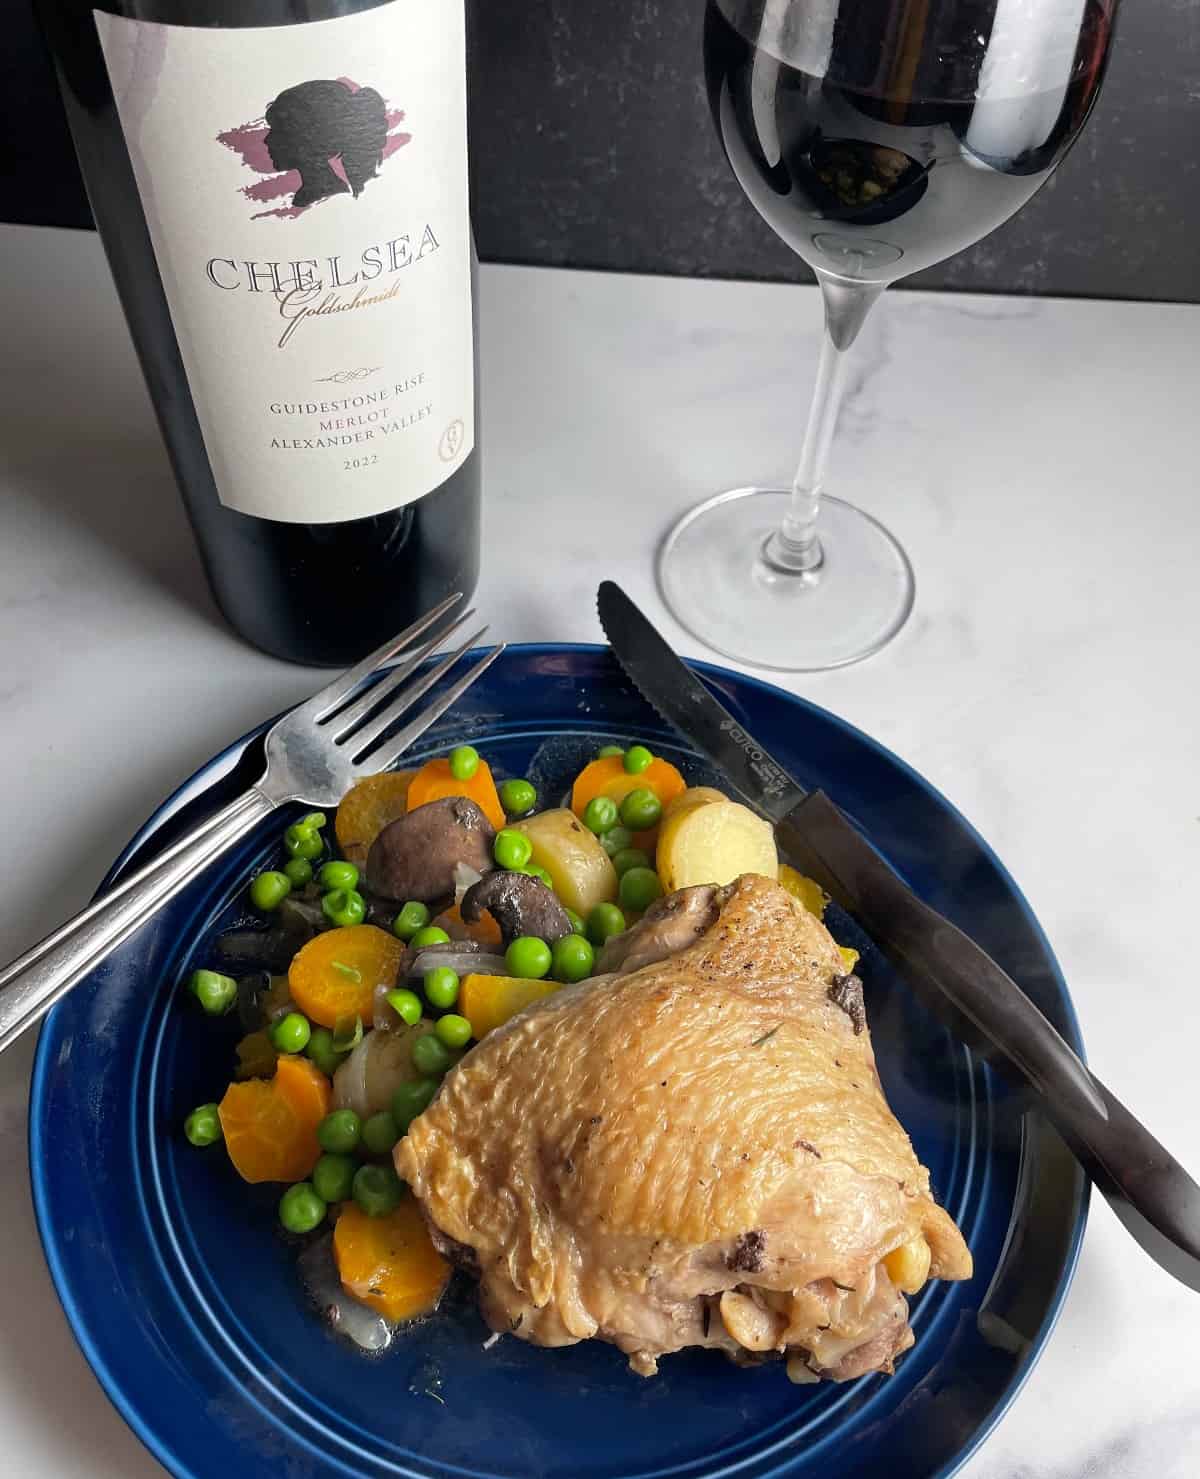 a braised chicken thigh plated with vegetables and served with a bottle of Merlot in the background.